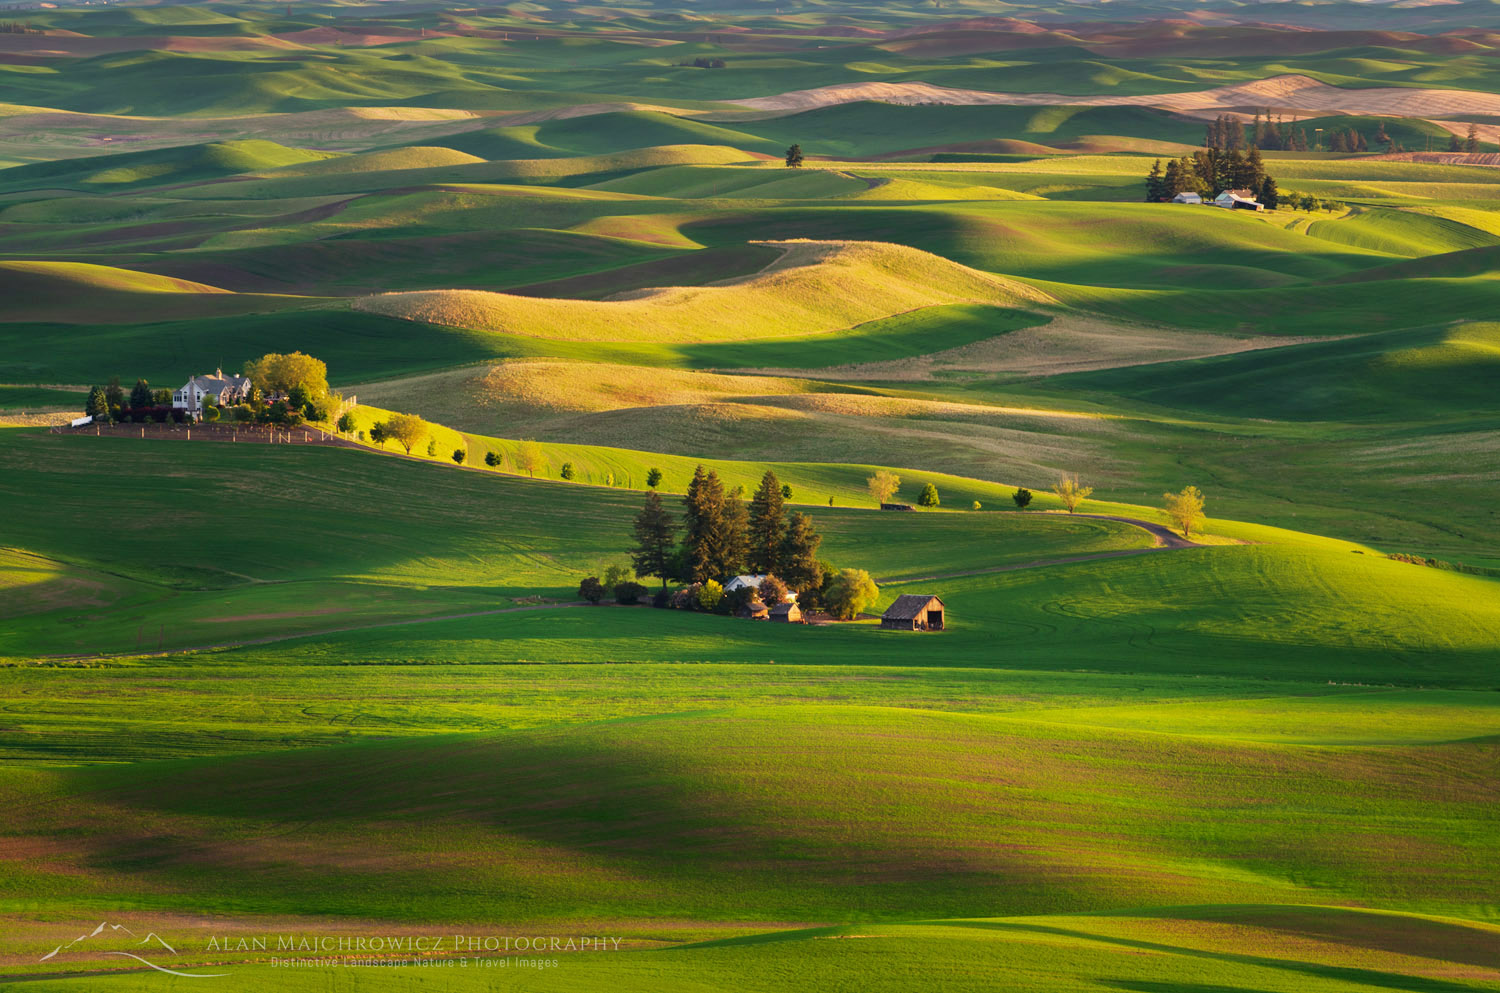 Wheatfields in the Palouse region of the Inland Empire of Washington #51760